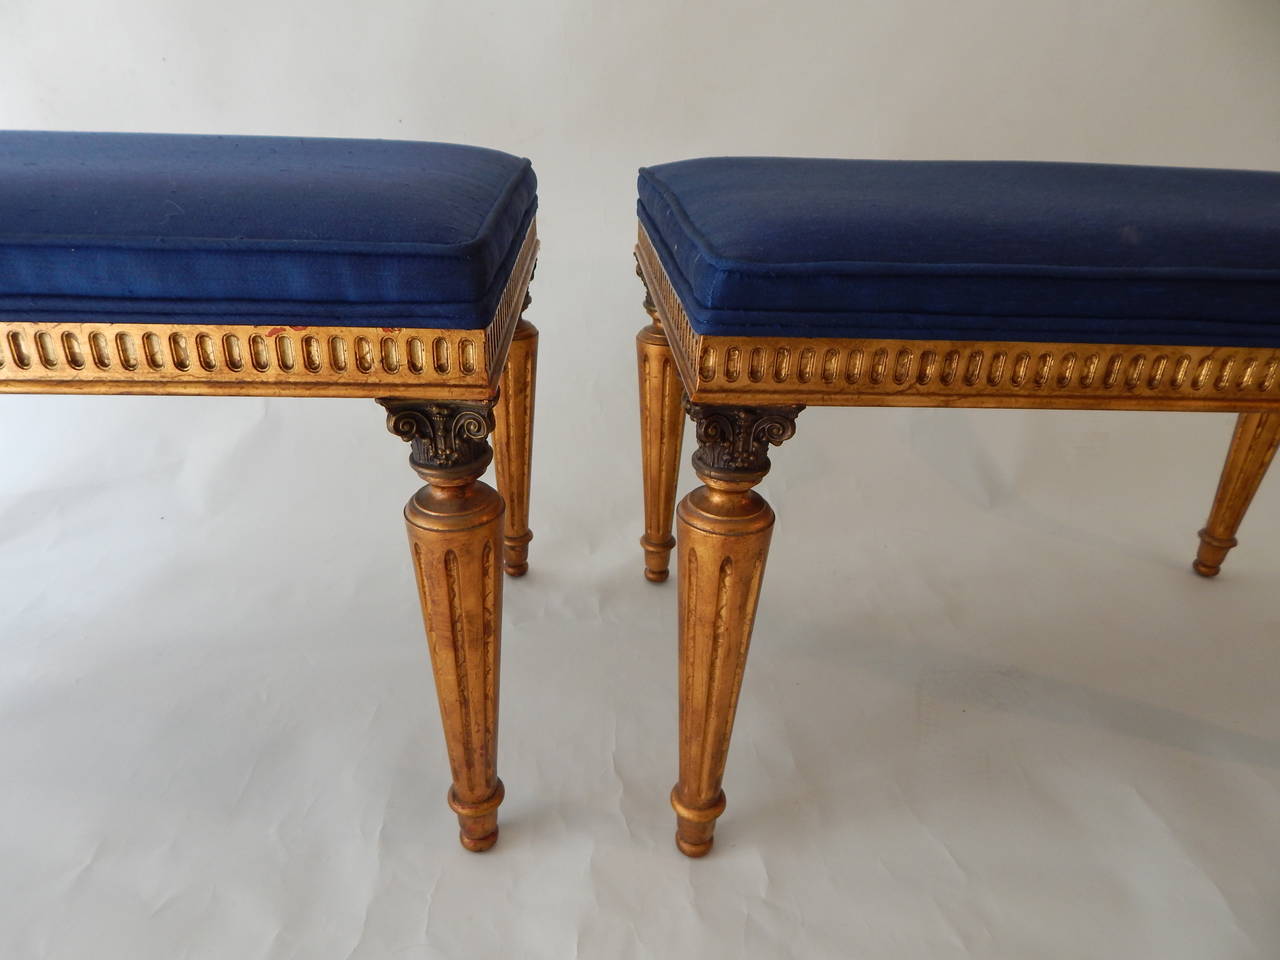 Mid-Century 1950s /1960s gorgeous pair of gilded wooden decorative benches with carved detail. Acquired from a well-cared for estate. Both are in excellent original condition. Original blue upholstery is in excellent condition.